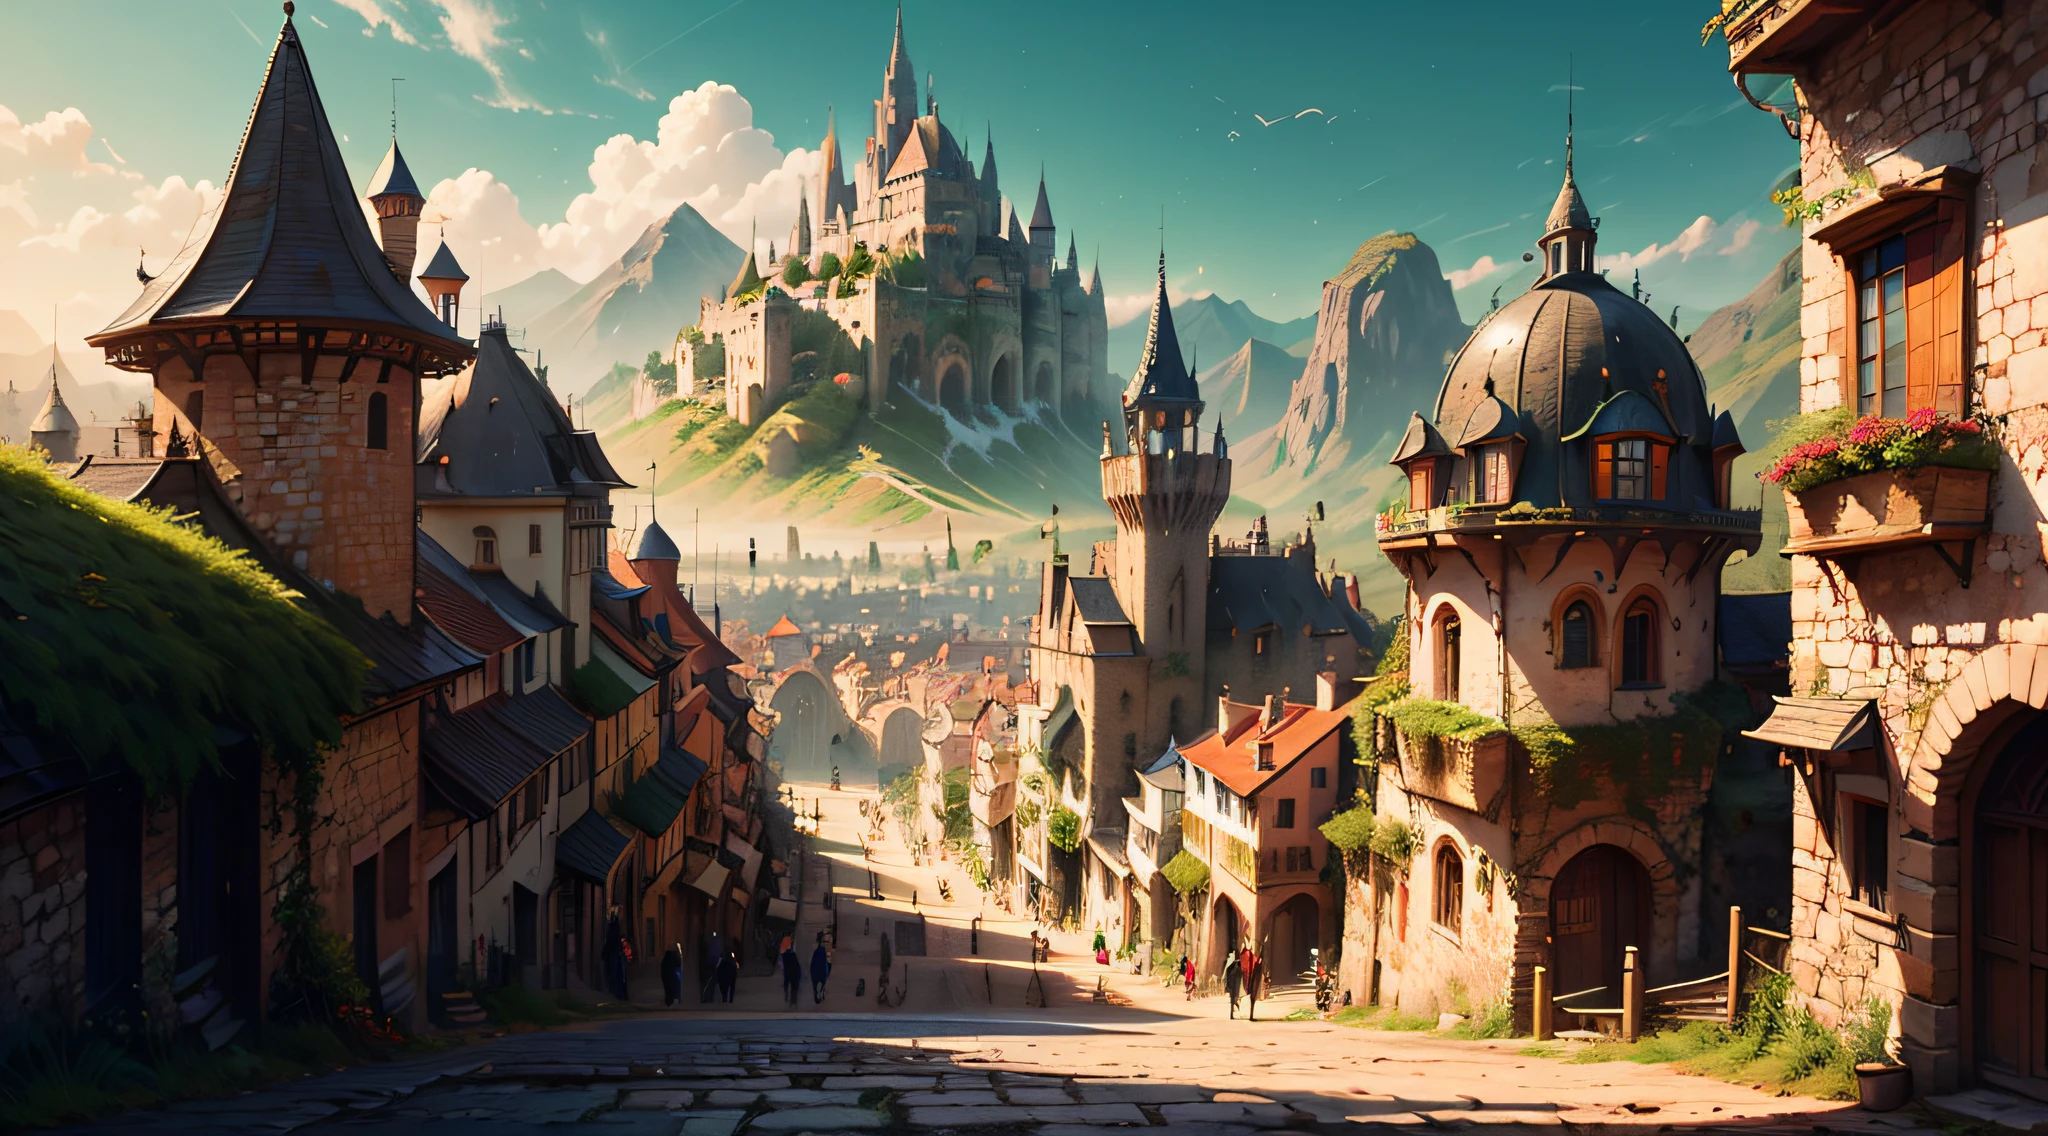 ((fantasy-medieval theme)), fantasy-medieval large-metropolitan fortified city, semi-tropical, mountains in the background, 1 high towering and long fantasy-medieval castle-palace standing at the top of the rocky-green hill in the middle of the city, fantasy-medieval roads, (((colorful buildings))), busy street, crowded, aesthetic, masterpiece, best quality